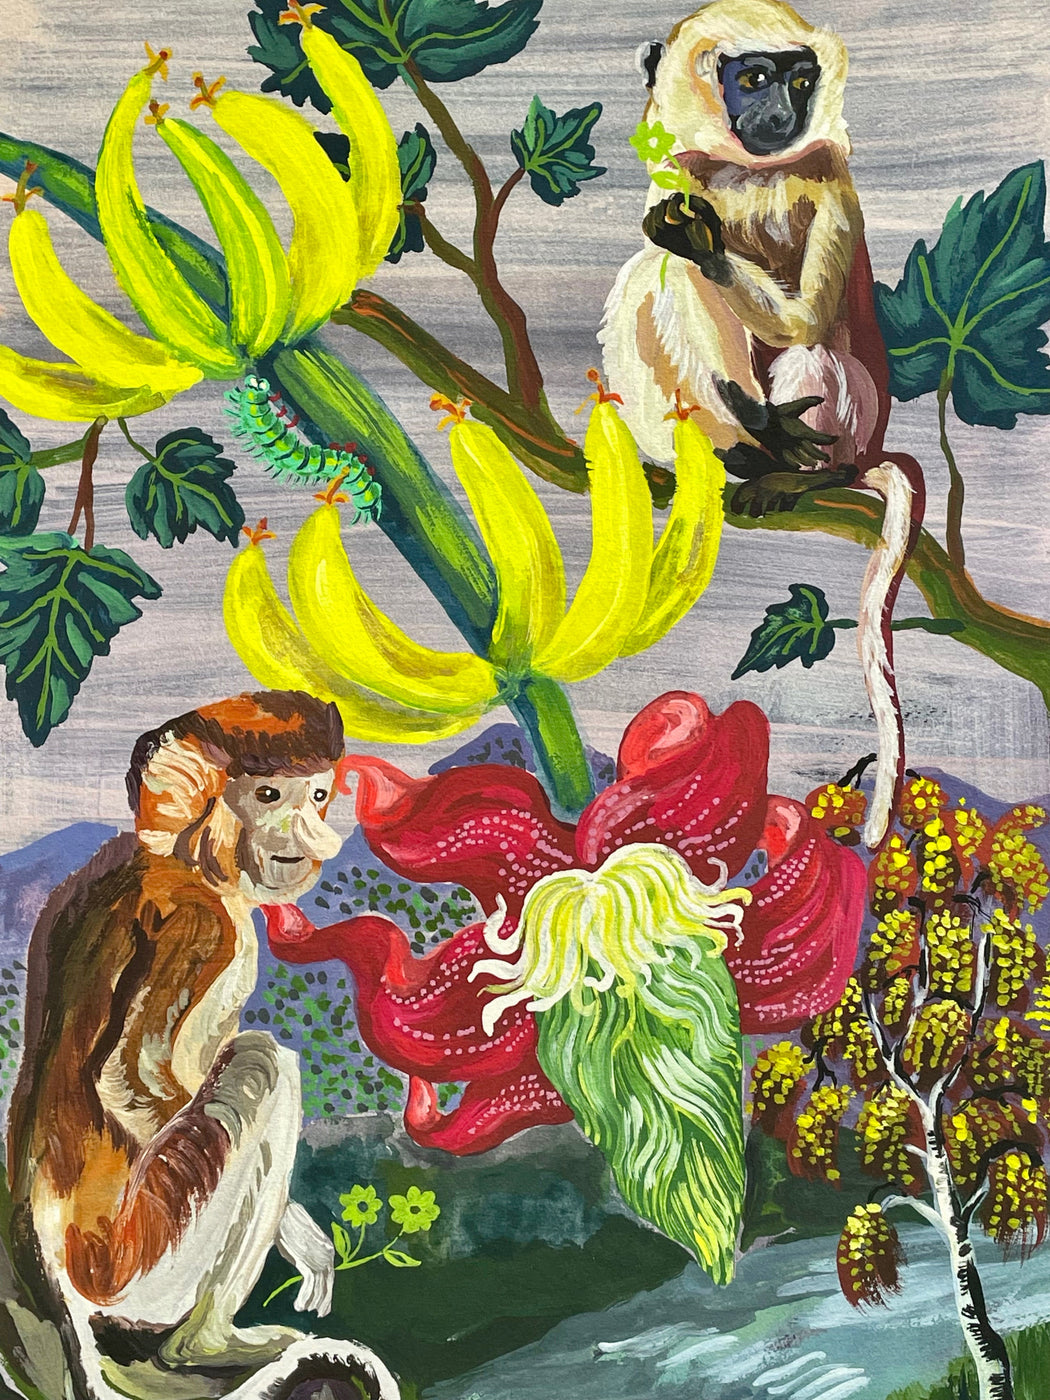 Nathalie Lete "In the Banana Tree" Limited Edition Print